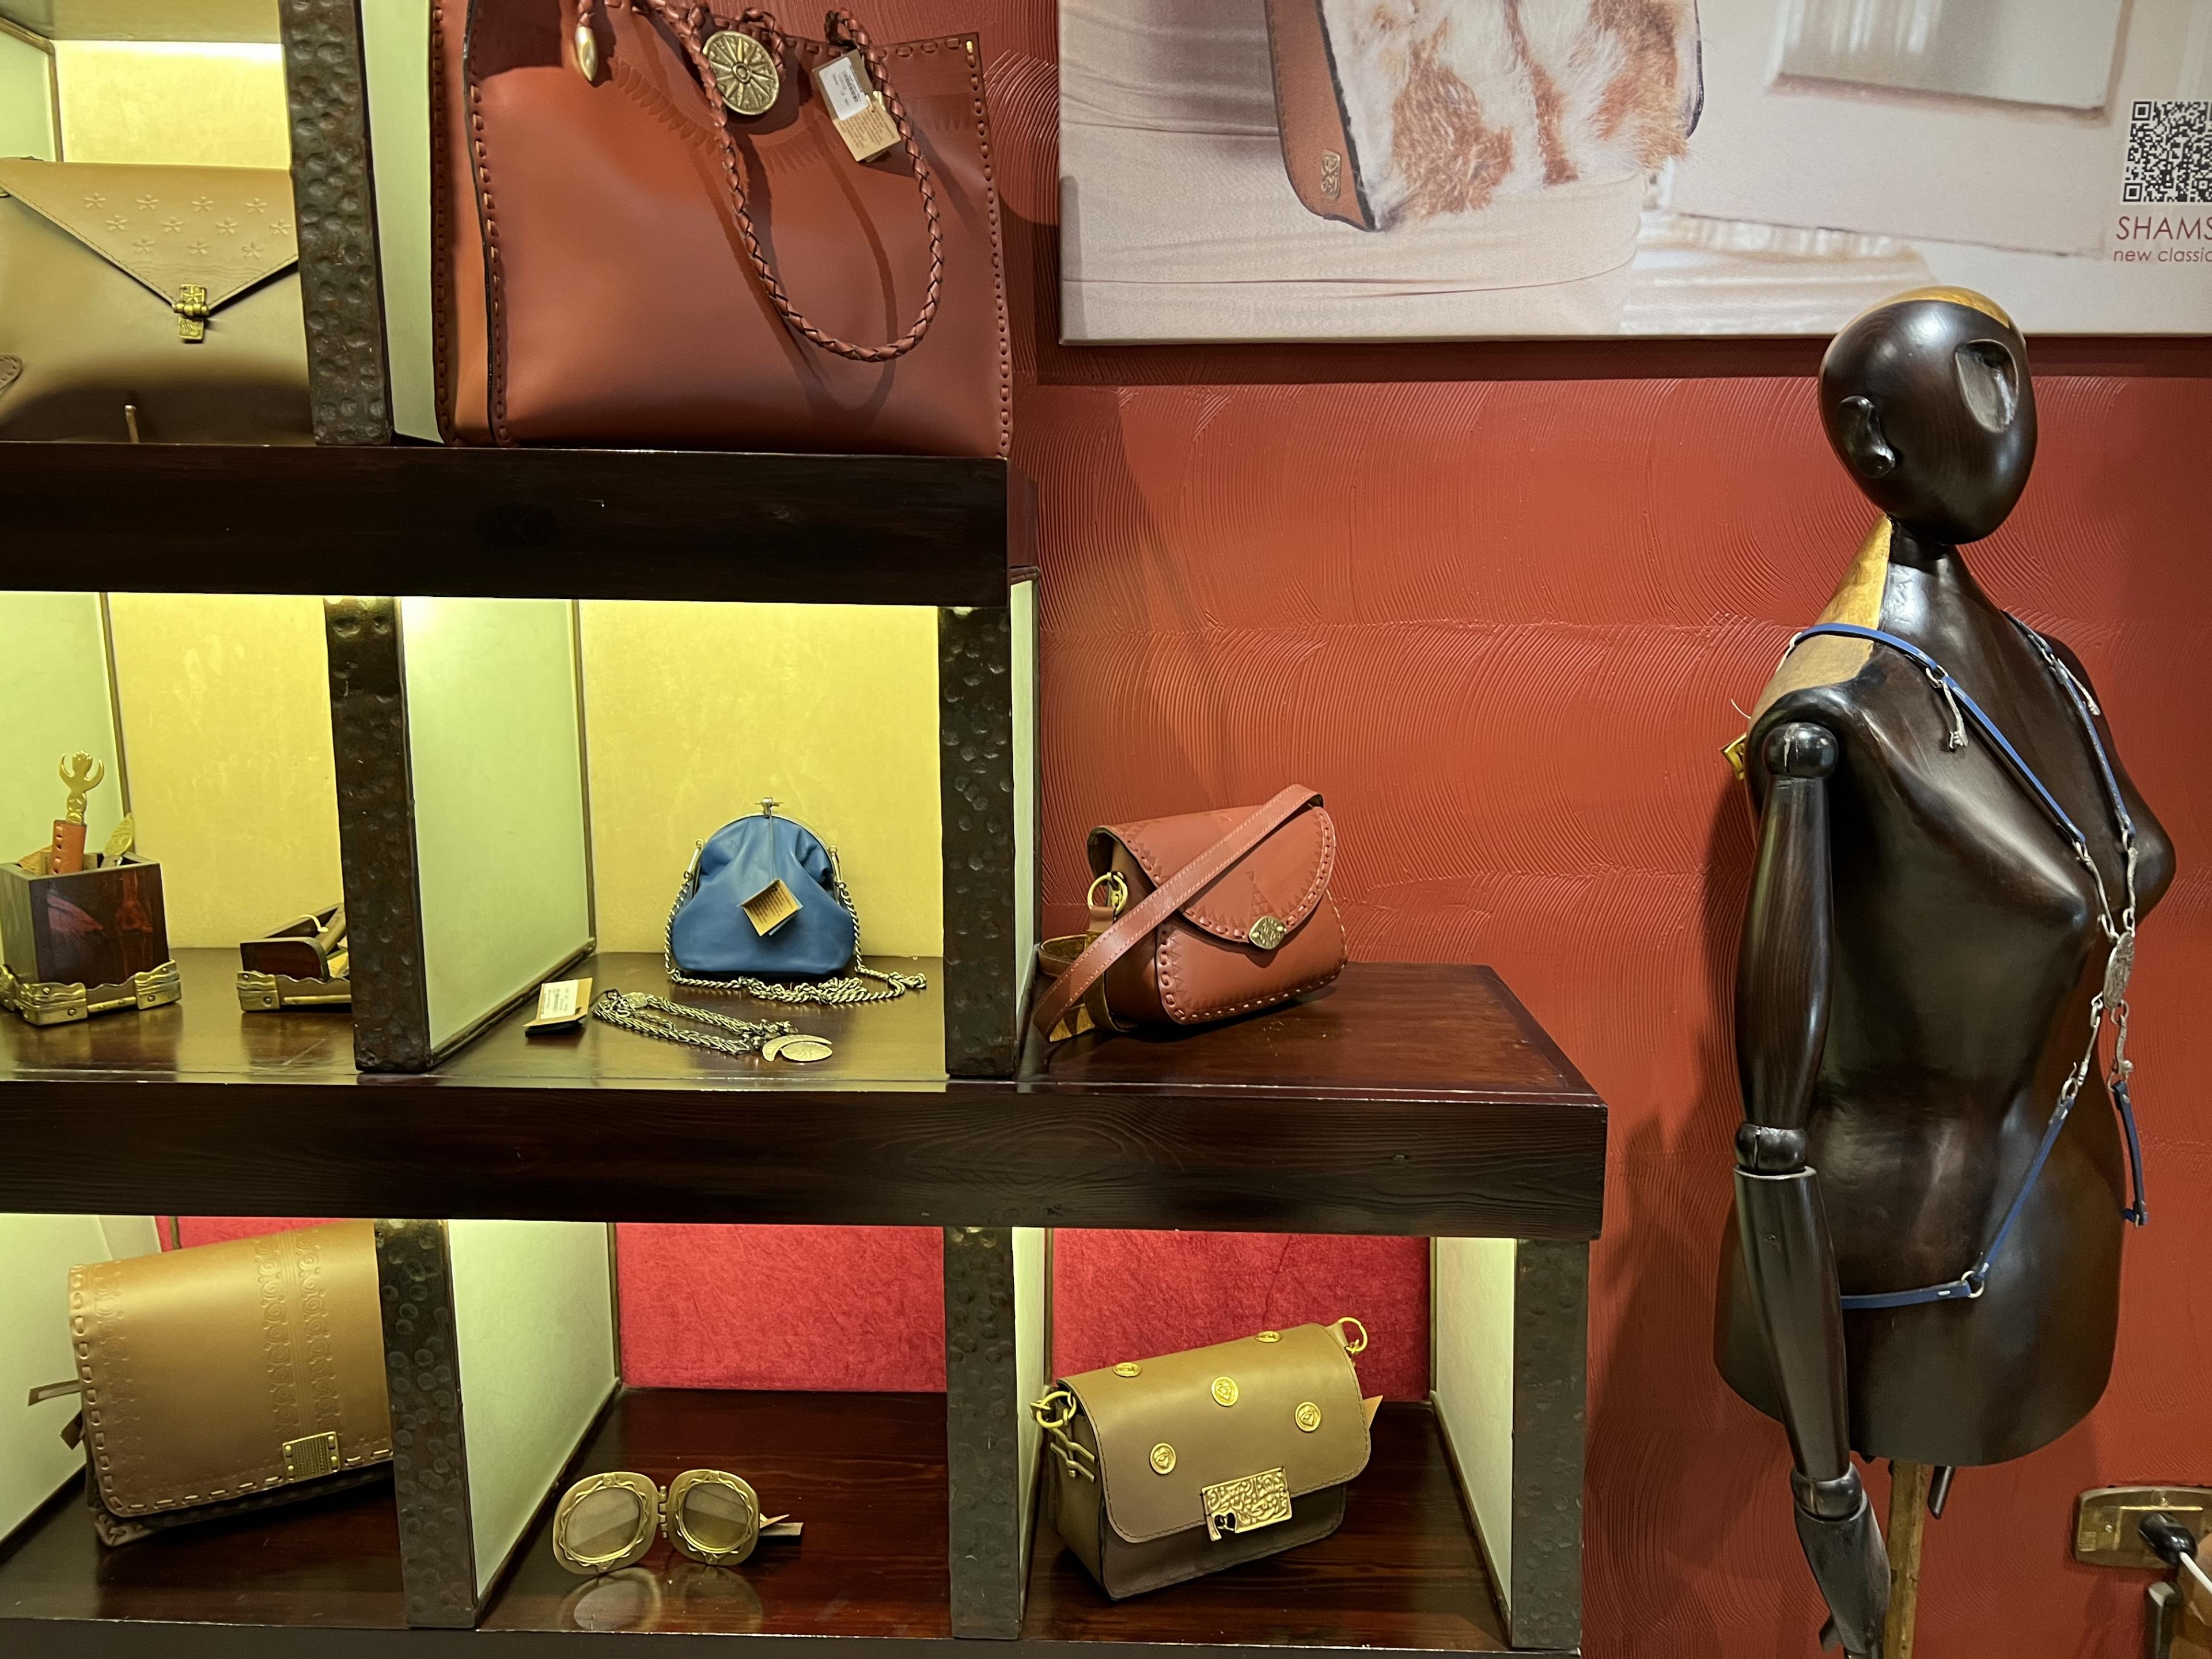 Shelves with purses and jewelry in each cubby and a mannequin displaying jewelry 